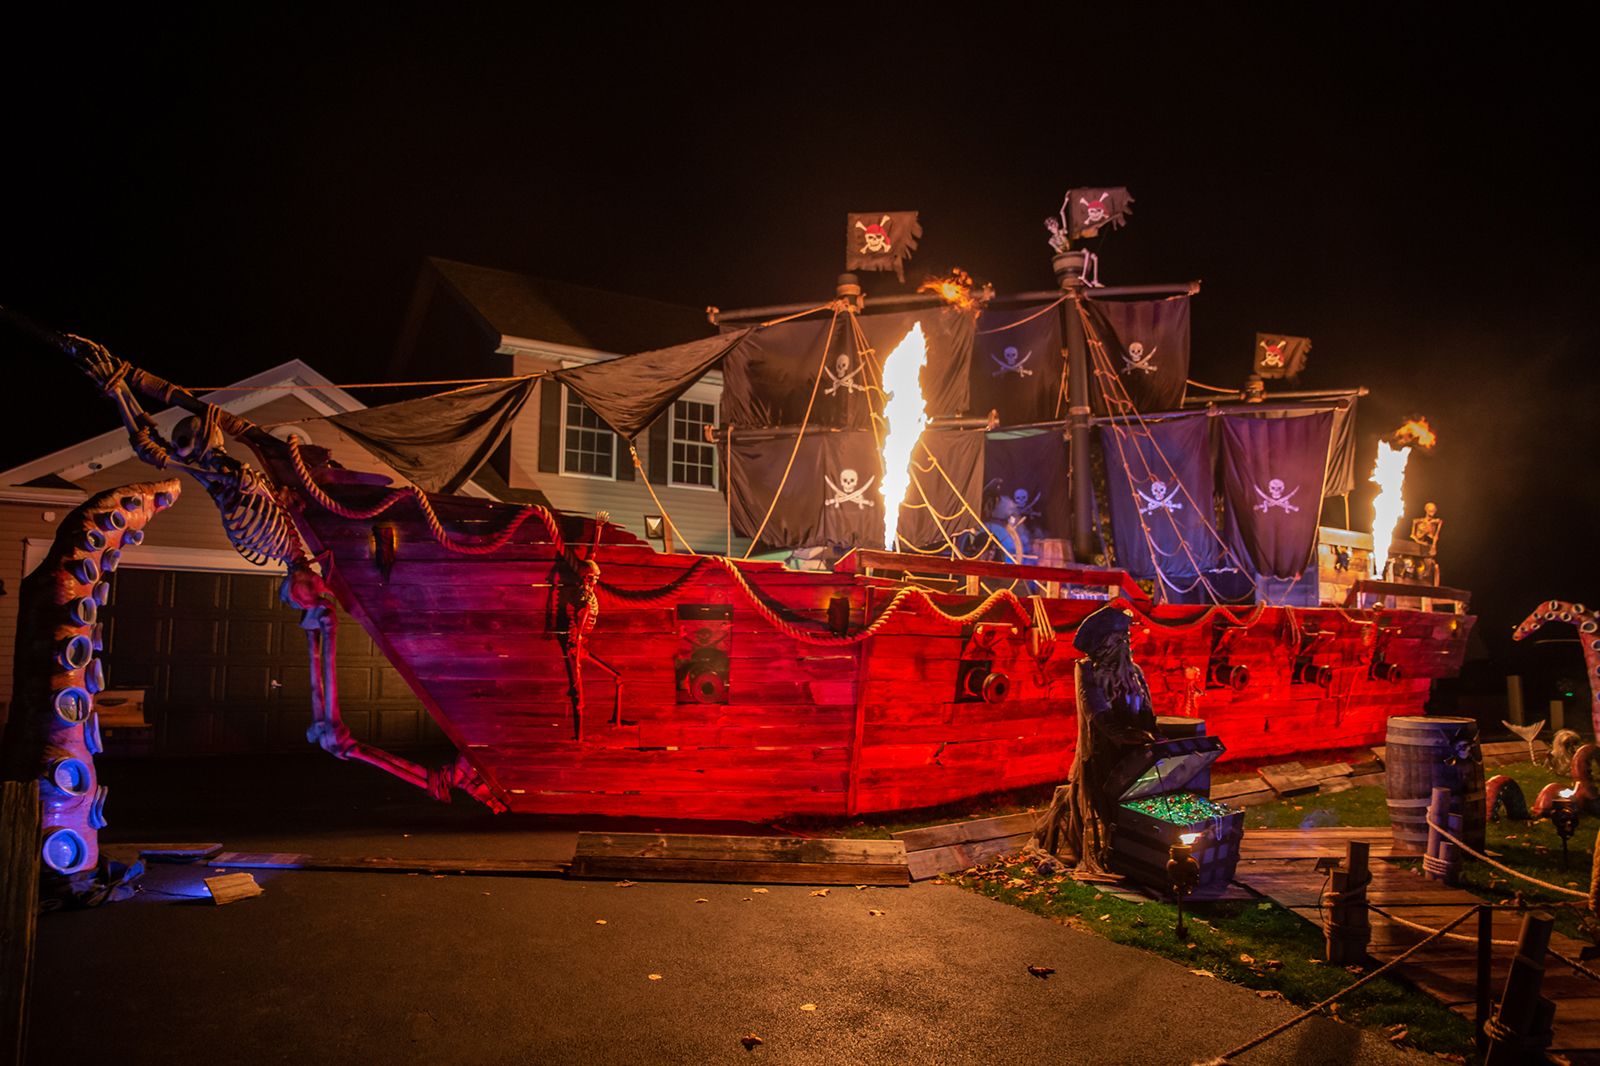 Pirate ship for Halloween: A father built his daughter a 50-foot